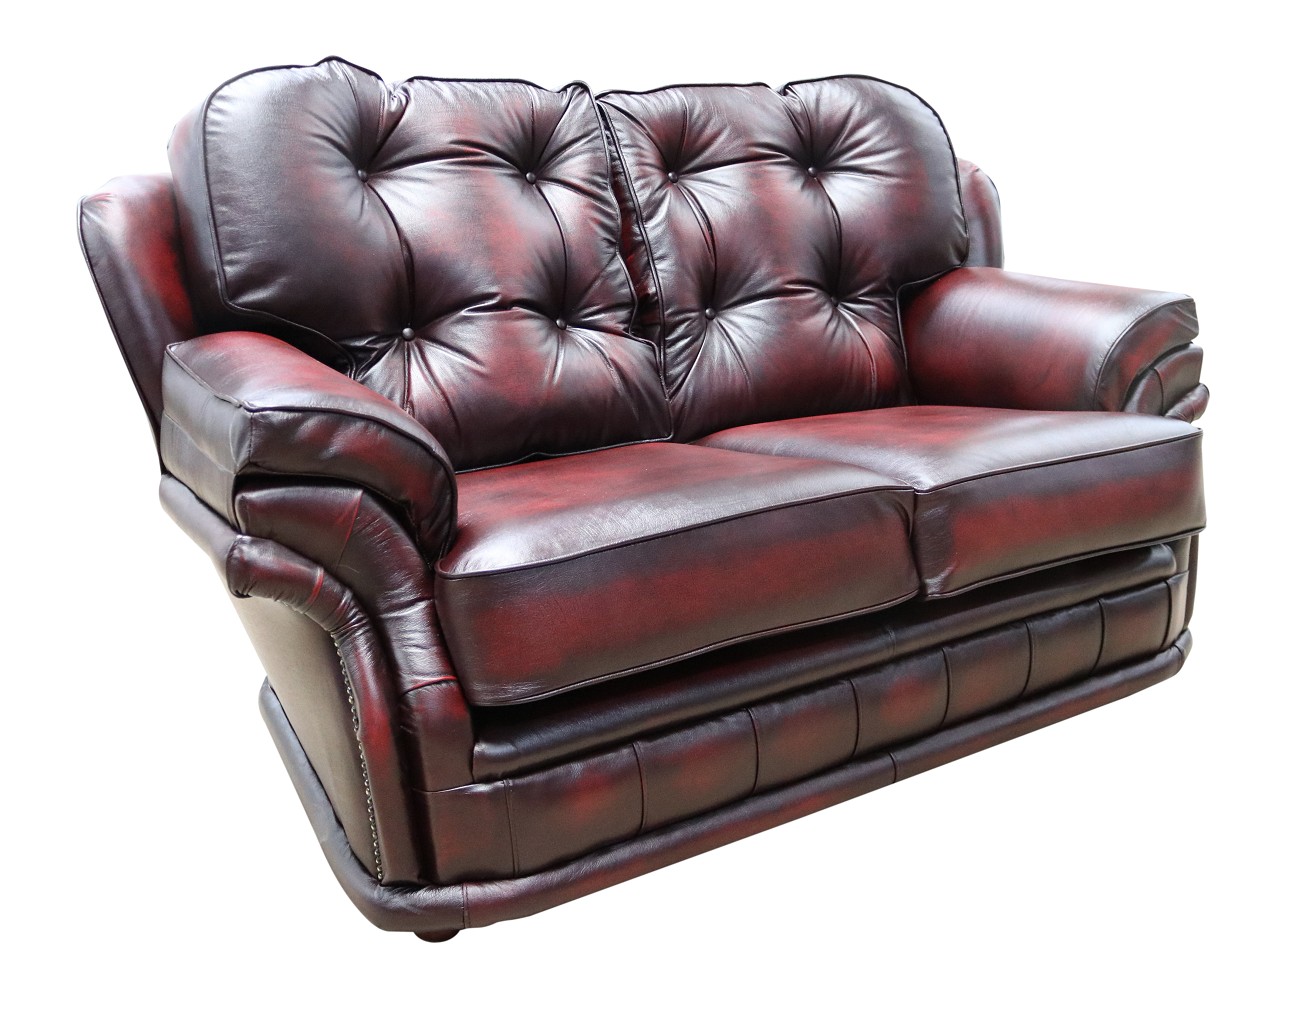 Product photograph of Chesterfield 2 Seater Antique Oxblood Red Leather Sofa Bespoke In Knightsbr Idge Style from Chesterfield Sofas.